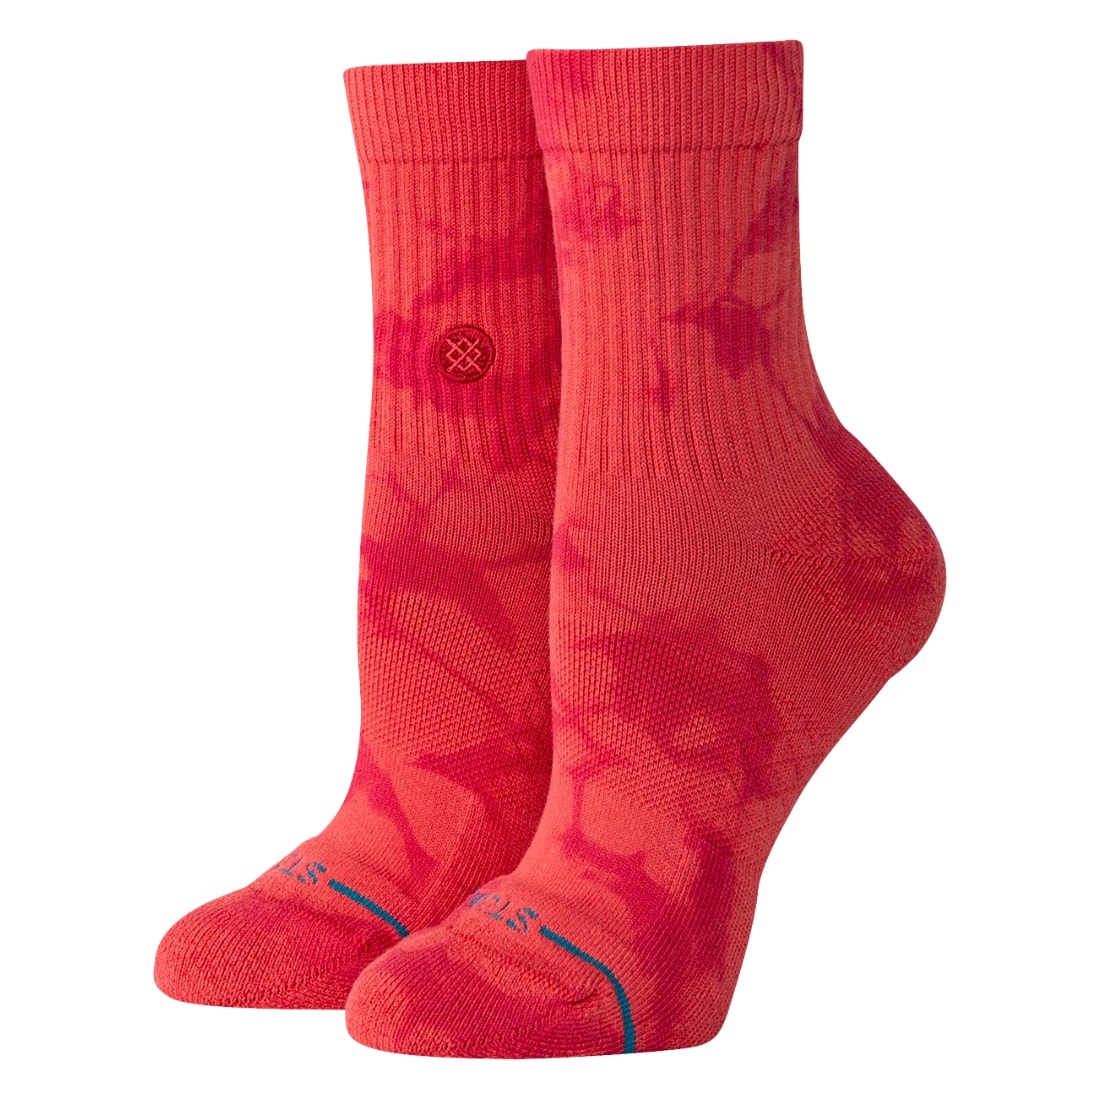 Stance Womens Dye Namic Quarter Socks - Red - Womens Low Ankle Socks by Stance